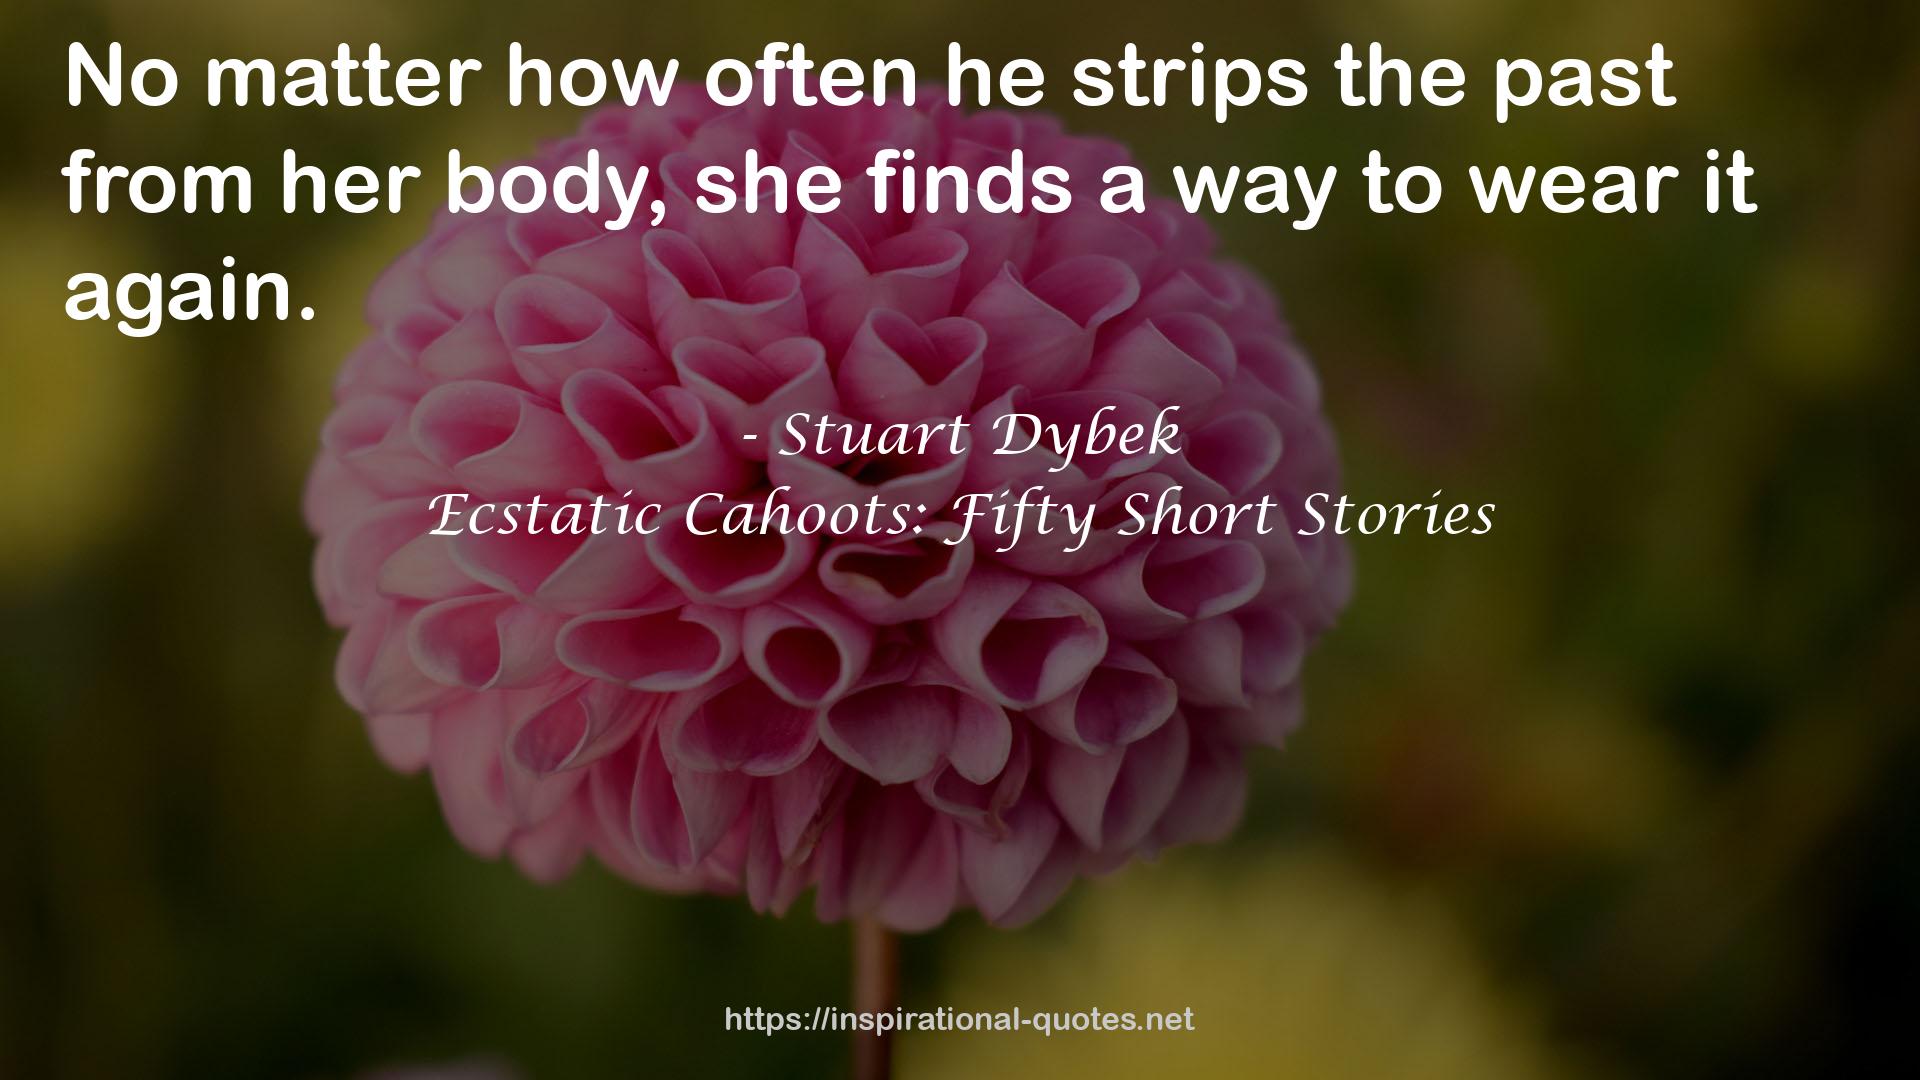 Ecstatic Cahoots: Fifty Short Stories QUOTES